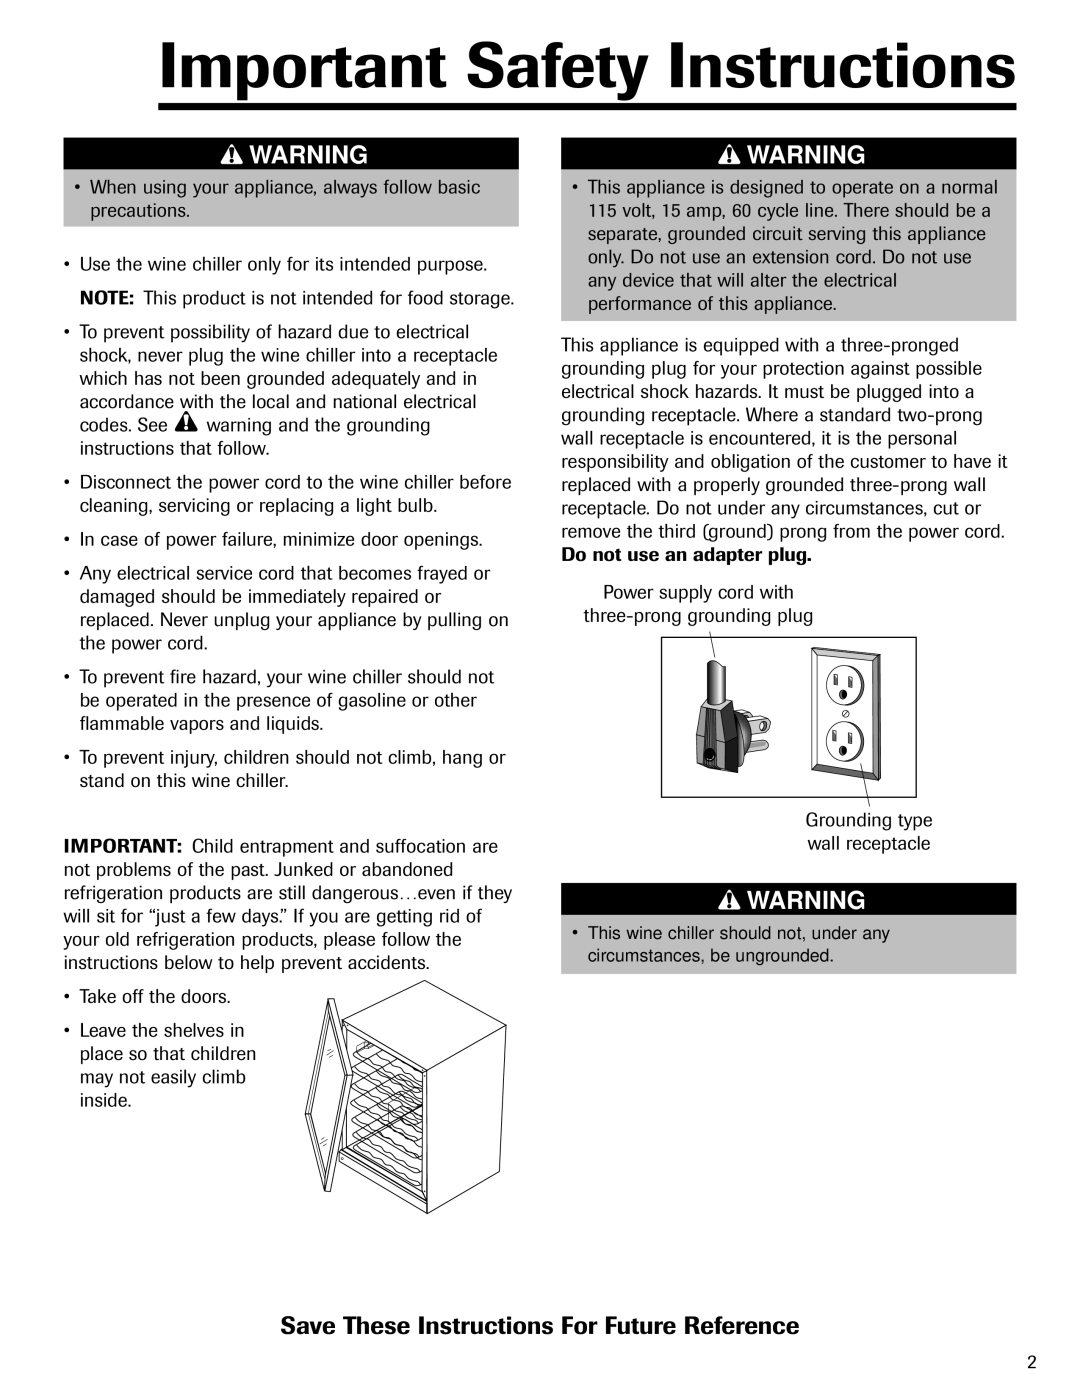 Jenn-Air 41007605 warranty Important Safety Instructions, Save These Instructions For Future Reference 